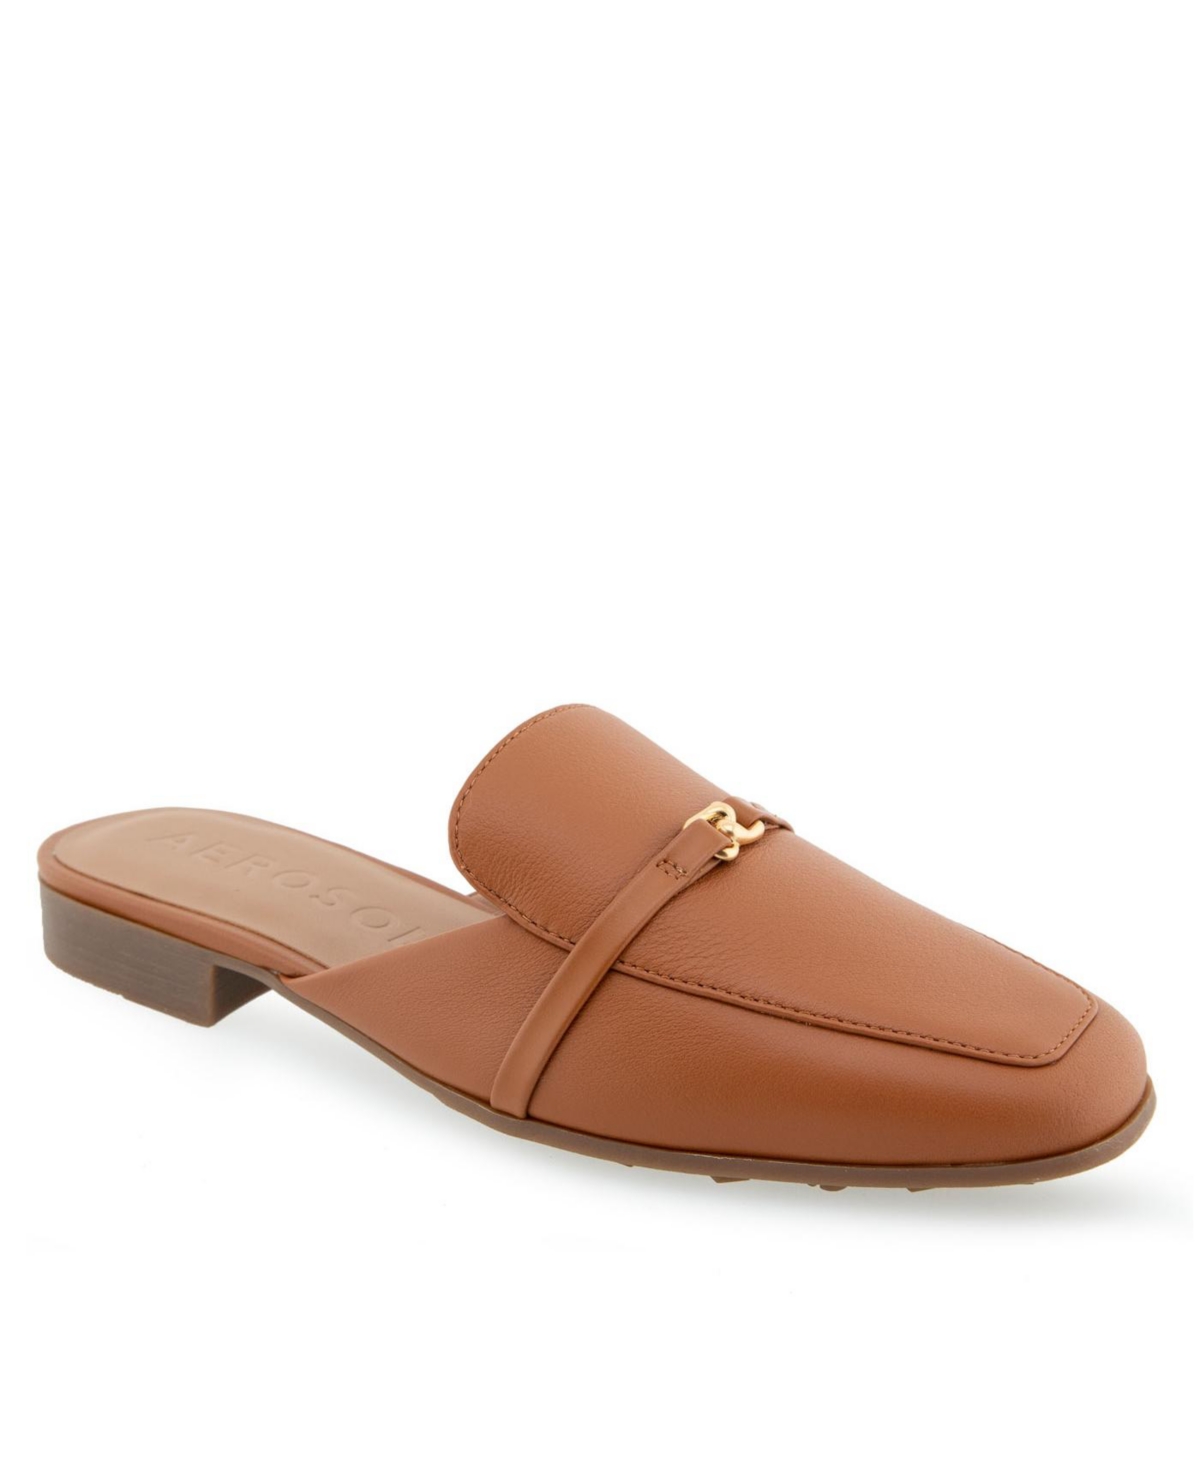 Women's Patchin Low Heel Mules - Tan Pebbled Leather